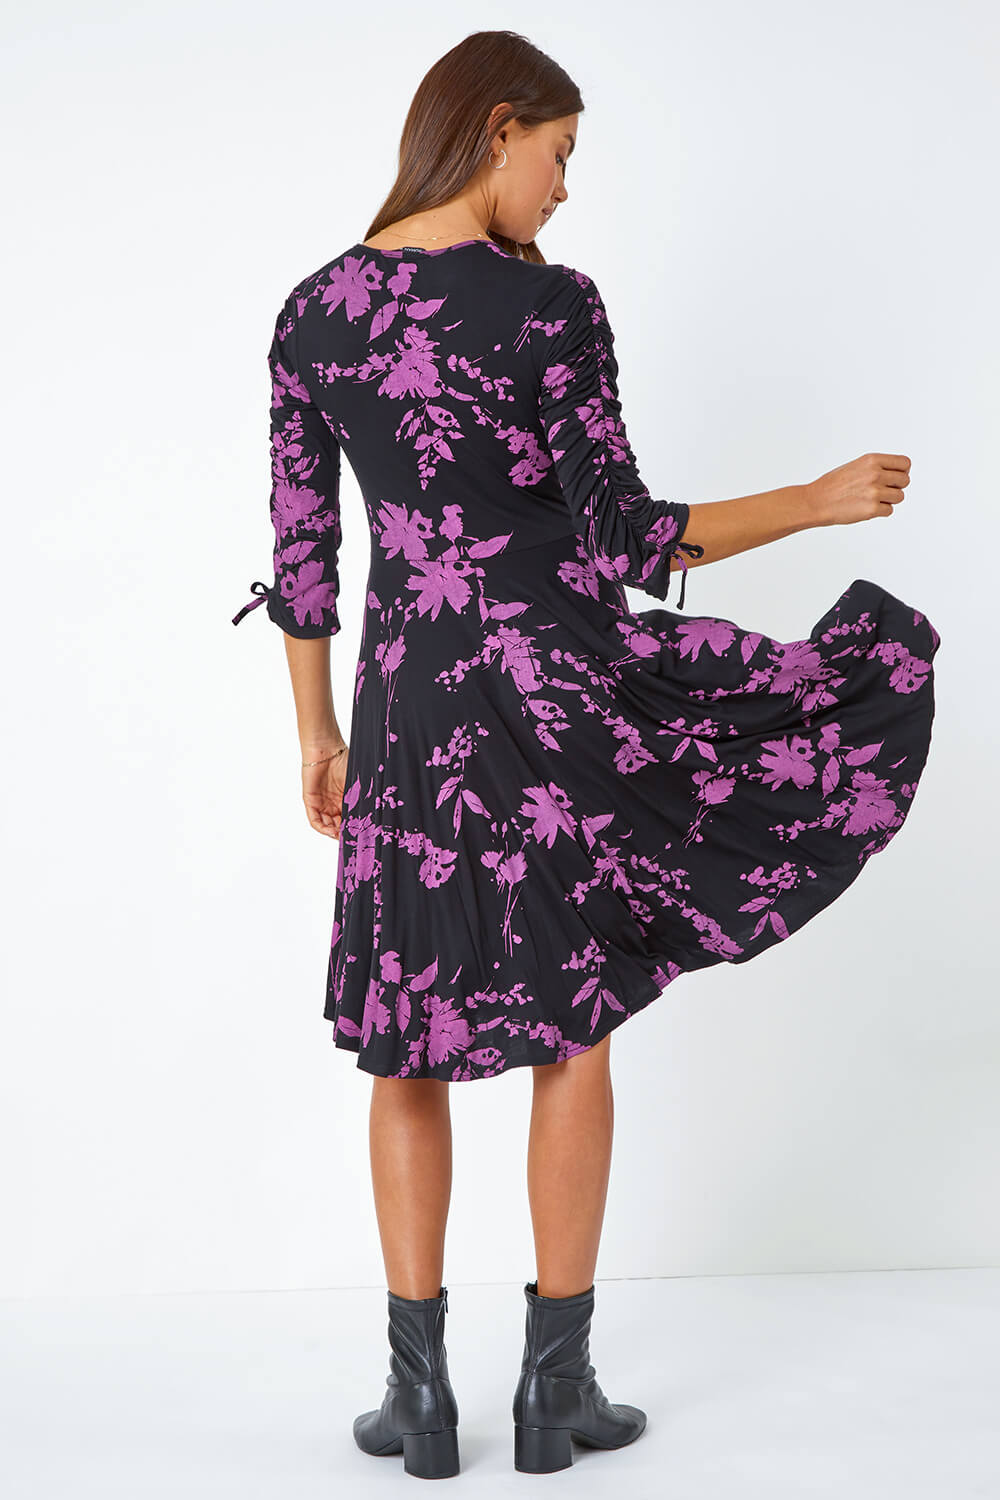 Mauve Floral Shadow Print Ruched Stretch Dress, Image 3 of 5